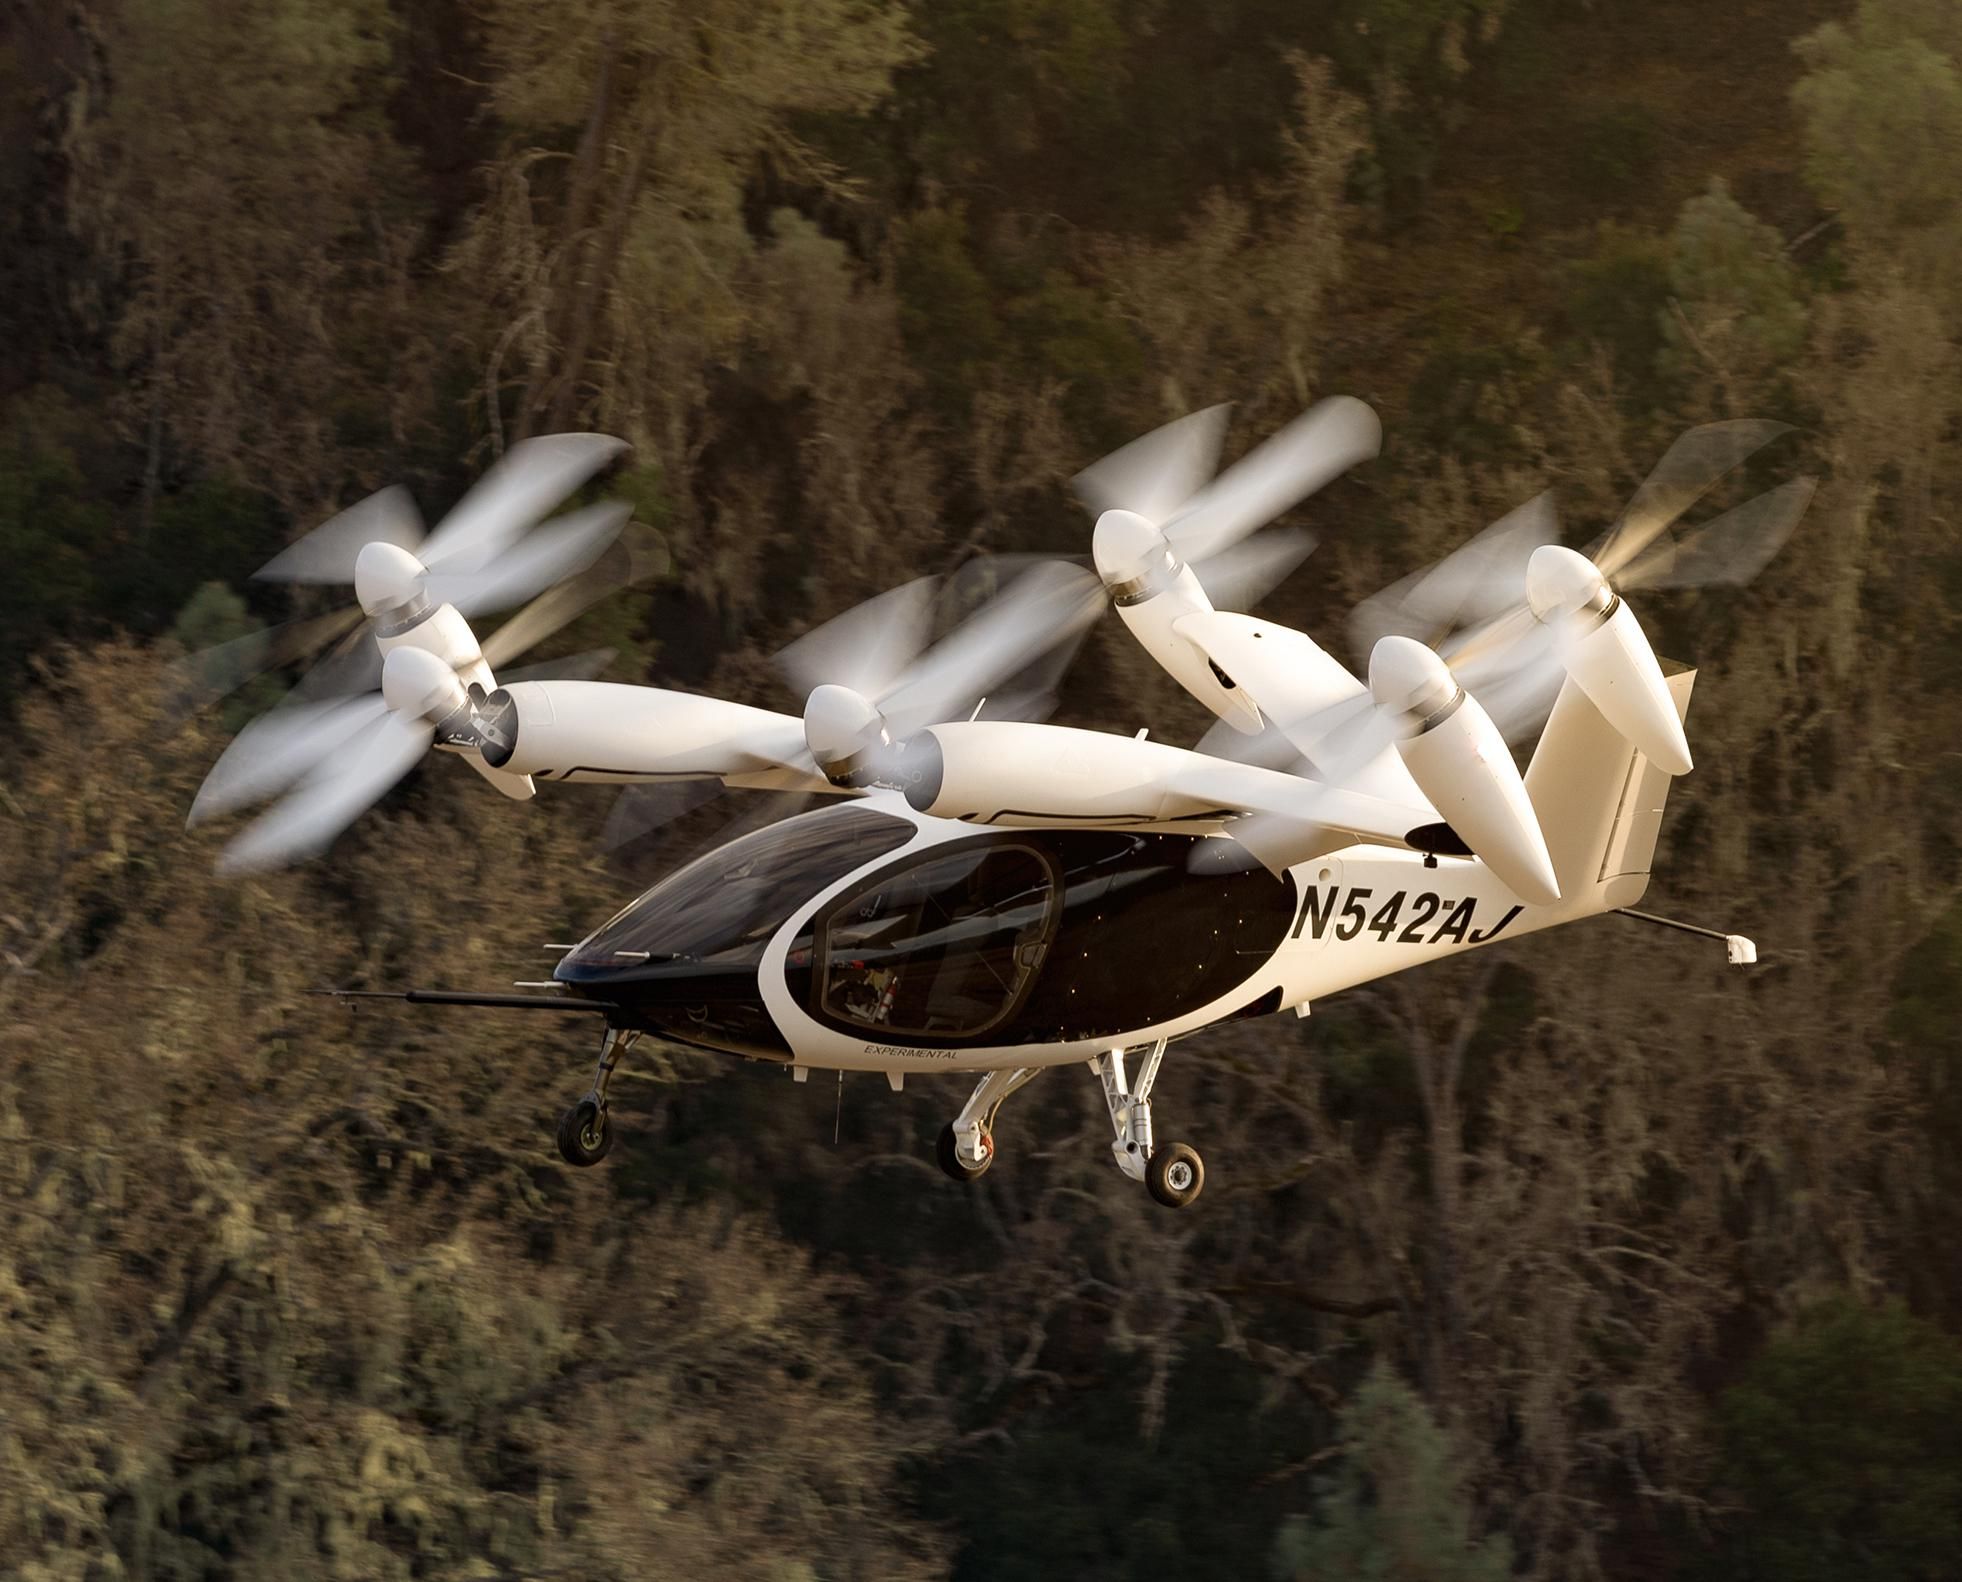 Image of Joby Aviation piloted aircraft flying above a forest.